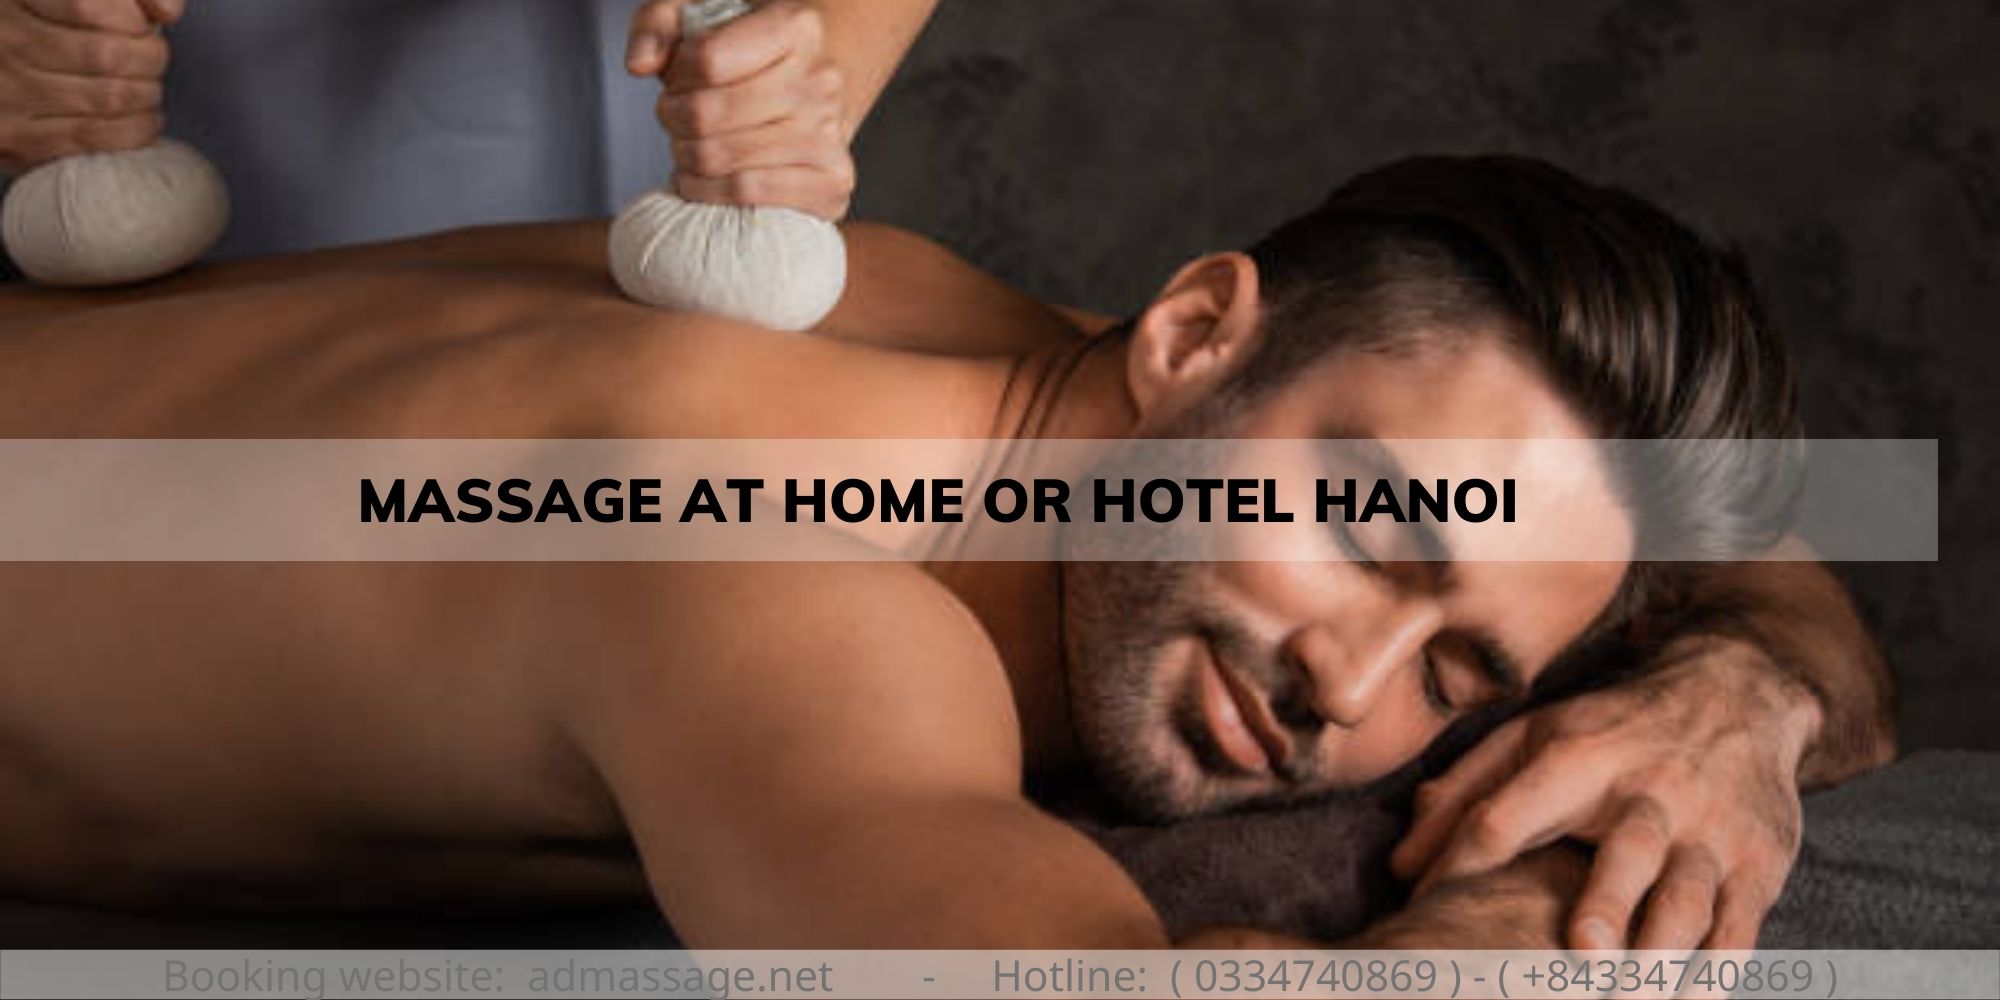 MASSAGE AT HOME OR HOTEL HANOI